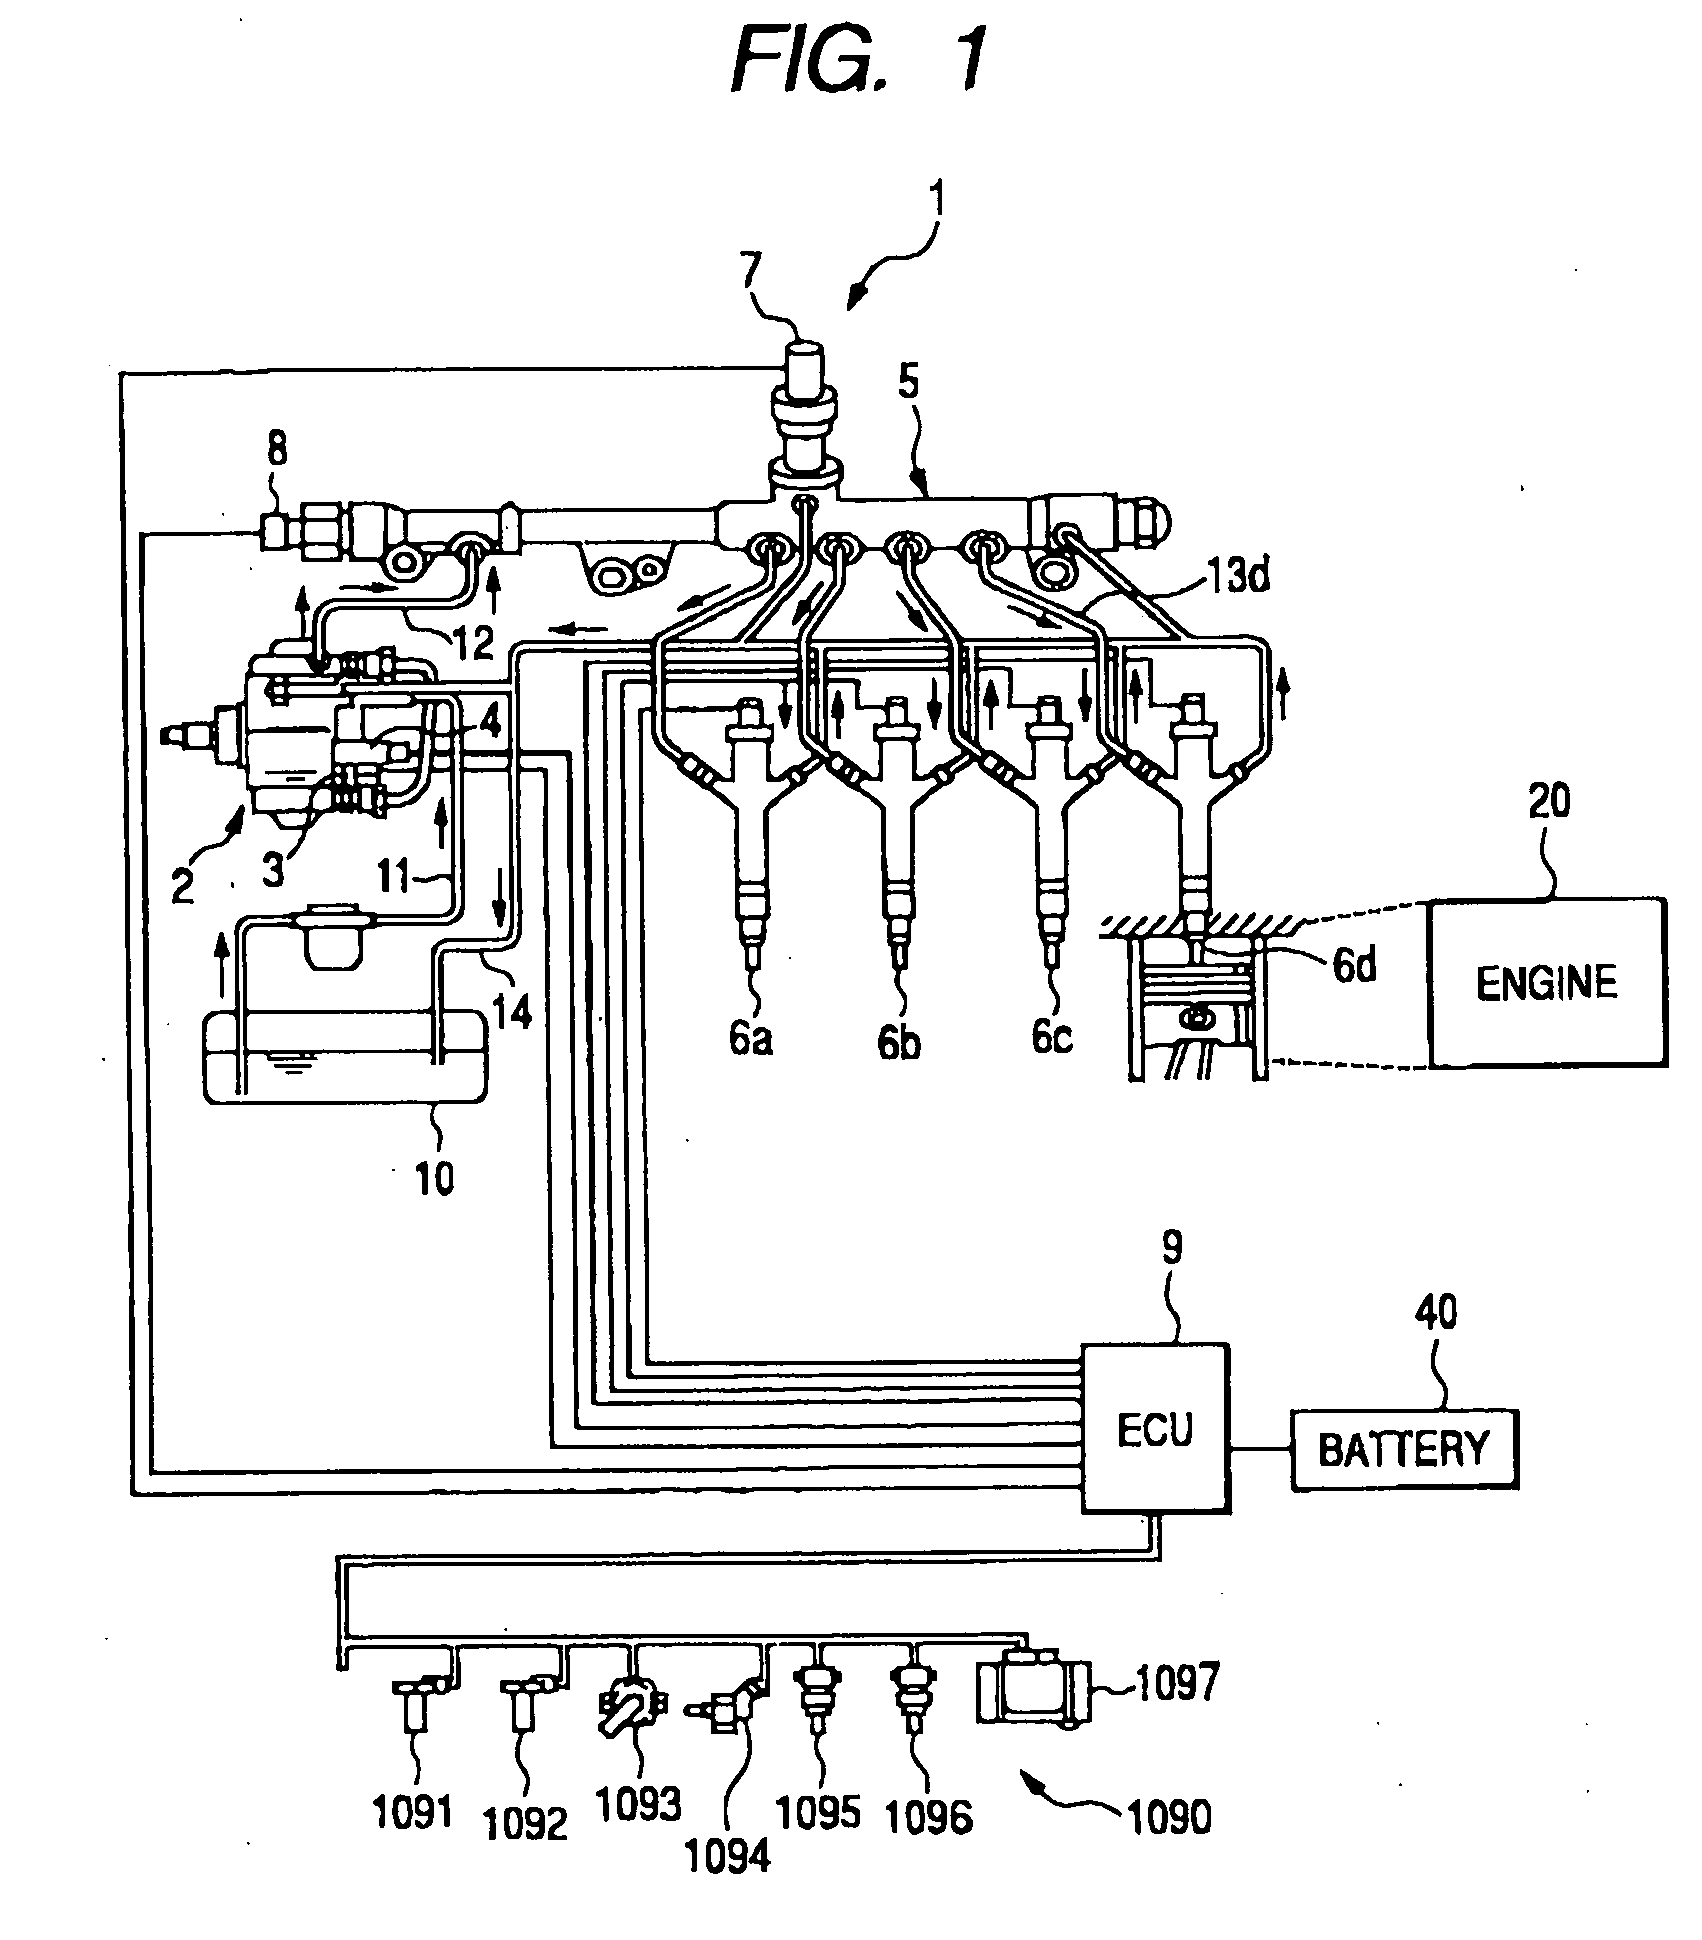 Method and apparatus for pressure reducing valve to reduce fuel pressure in a common rail